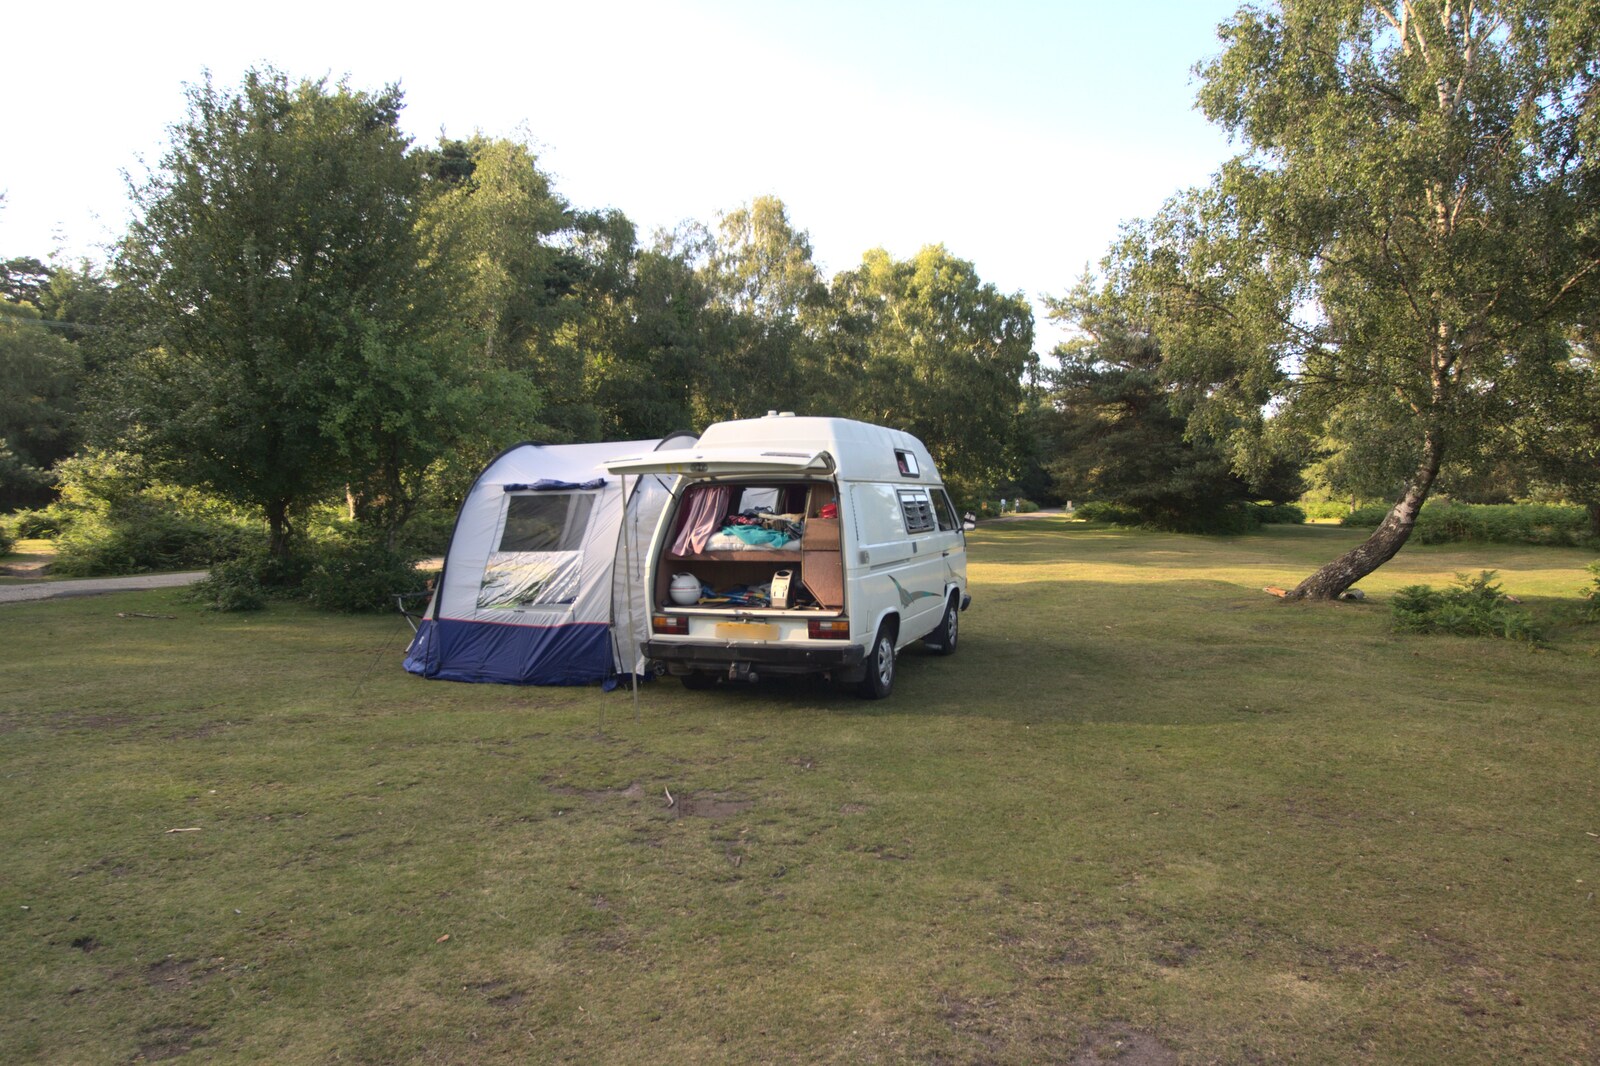 The van at Roundhill Campsite in the New Forest from A Camper Van Odyssey: Oxford, Salisbury, New Forest and Barton-on-Sea - 19th June 2011